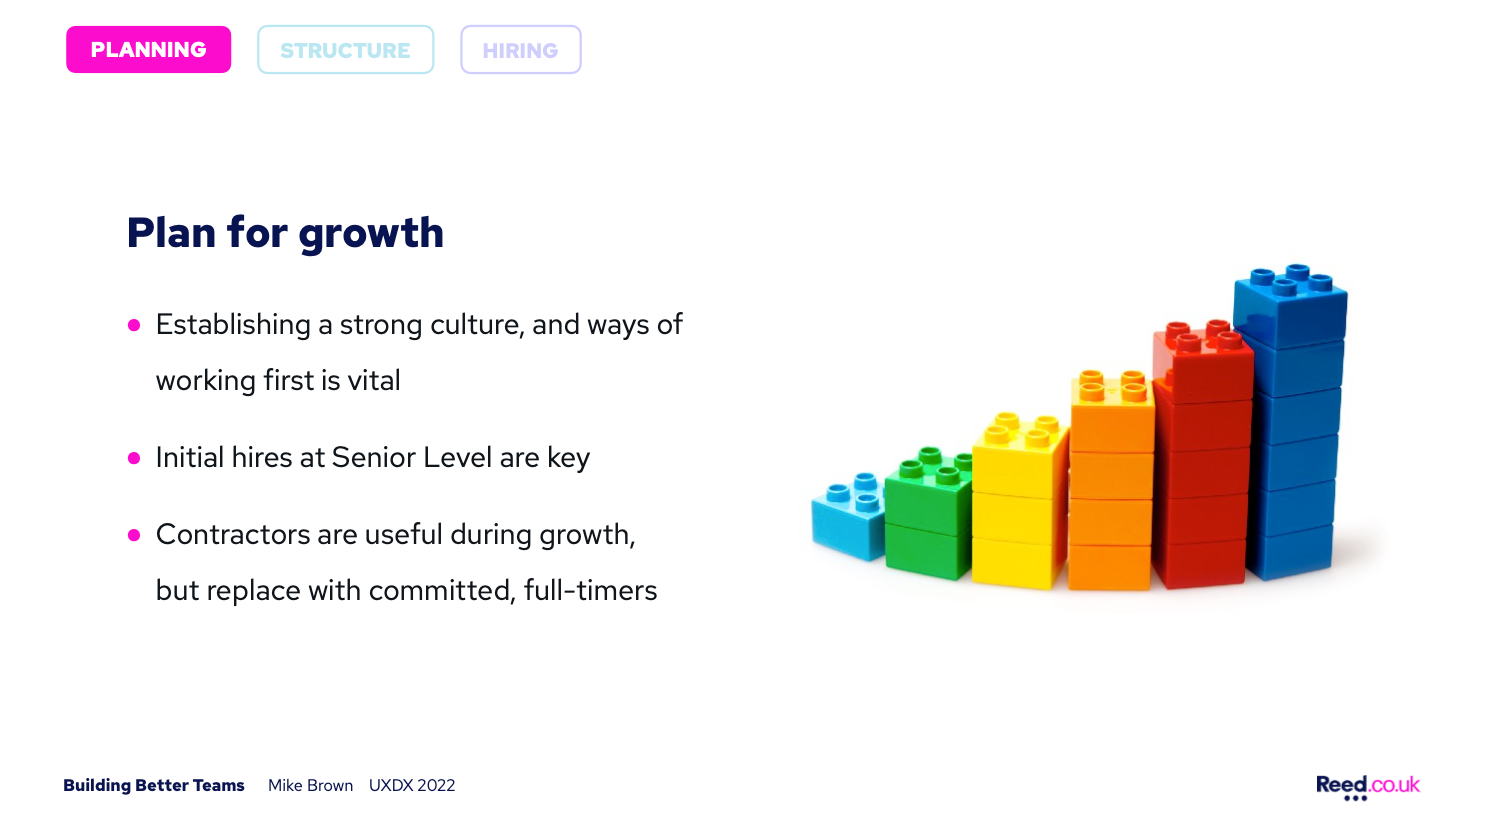 Steps of the plan for growth